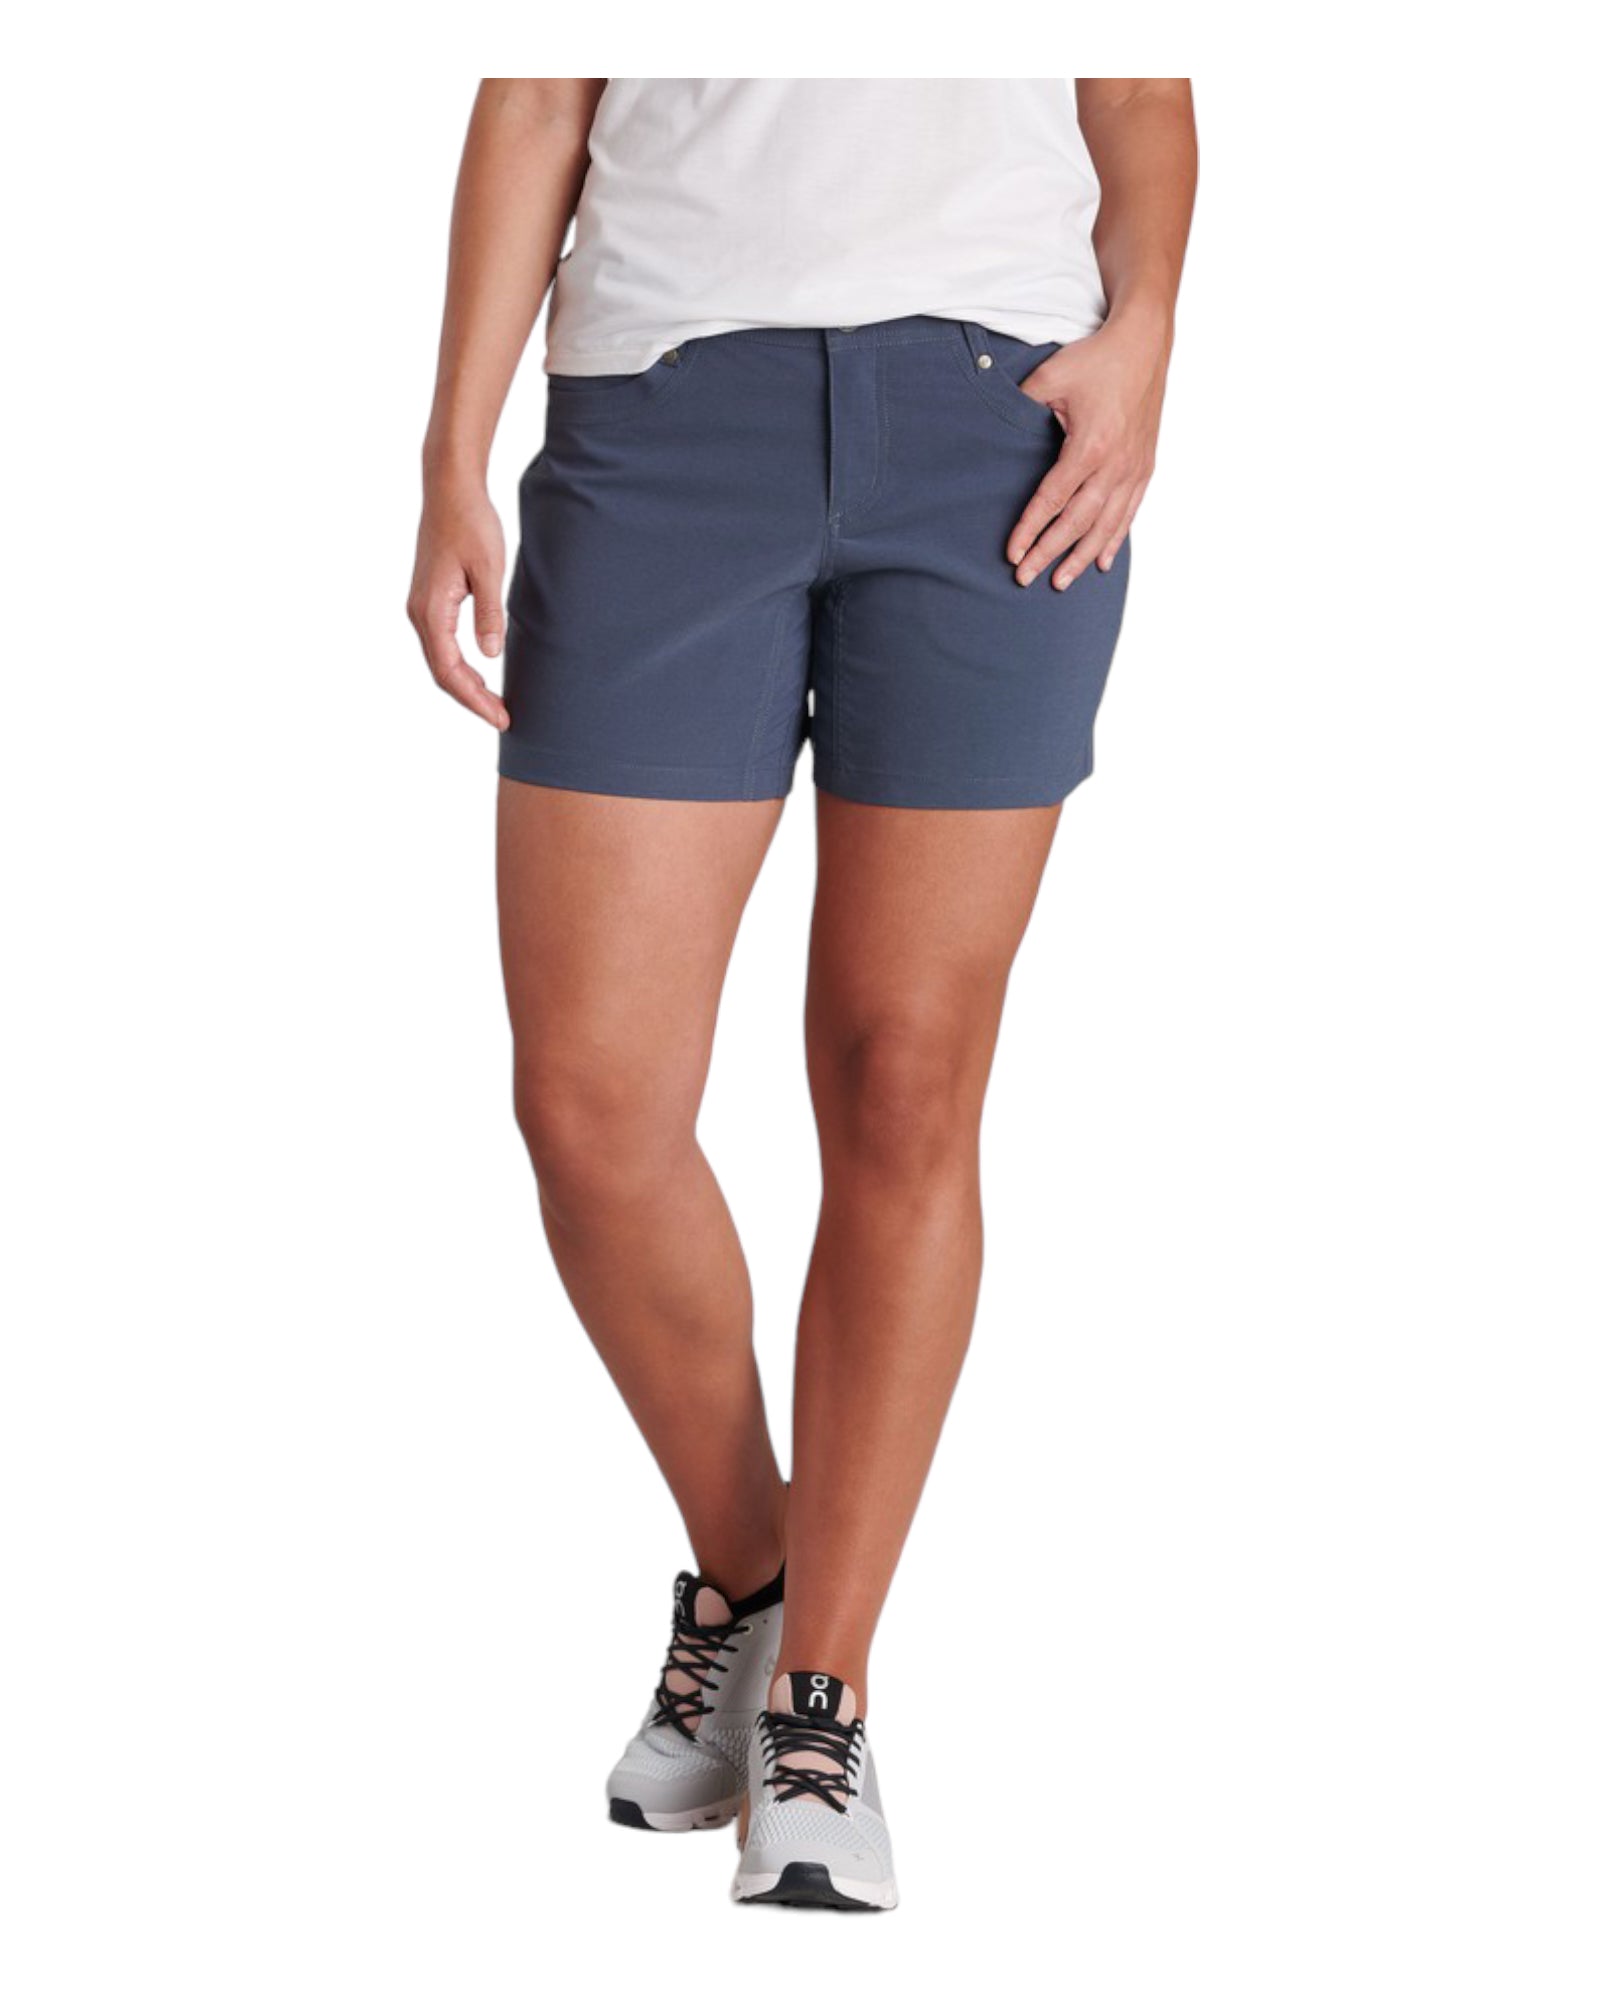 Perfect for outdoor adventures, the stylish TREKR short is cut from KÜHL’s exclusive and quick-drying REKOIL fabric. These shorts are comfortably stretchy with rebound so they maintain their fit. With a 5.5” inseam, this casual style is perfect for the trail or deck.